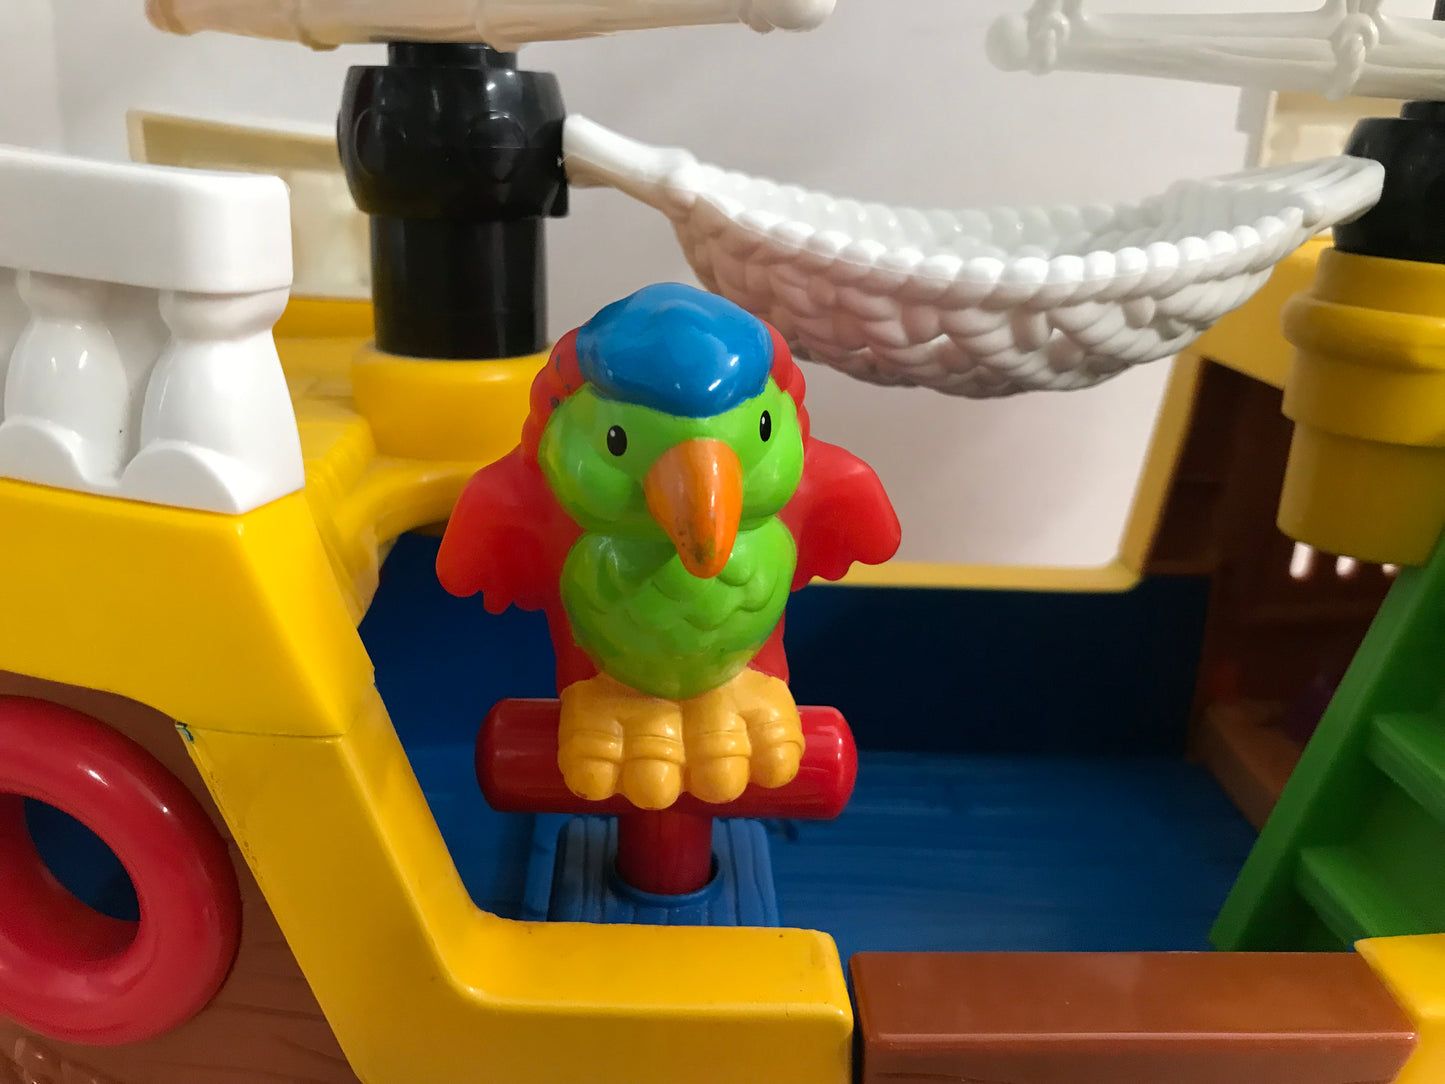 Fisher Price Little People Real Sounds Pirate Ship Loaded